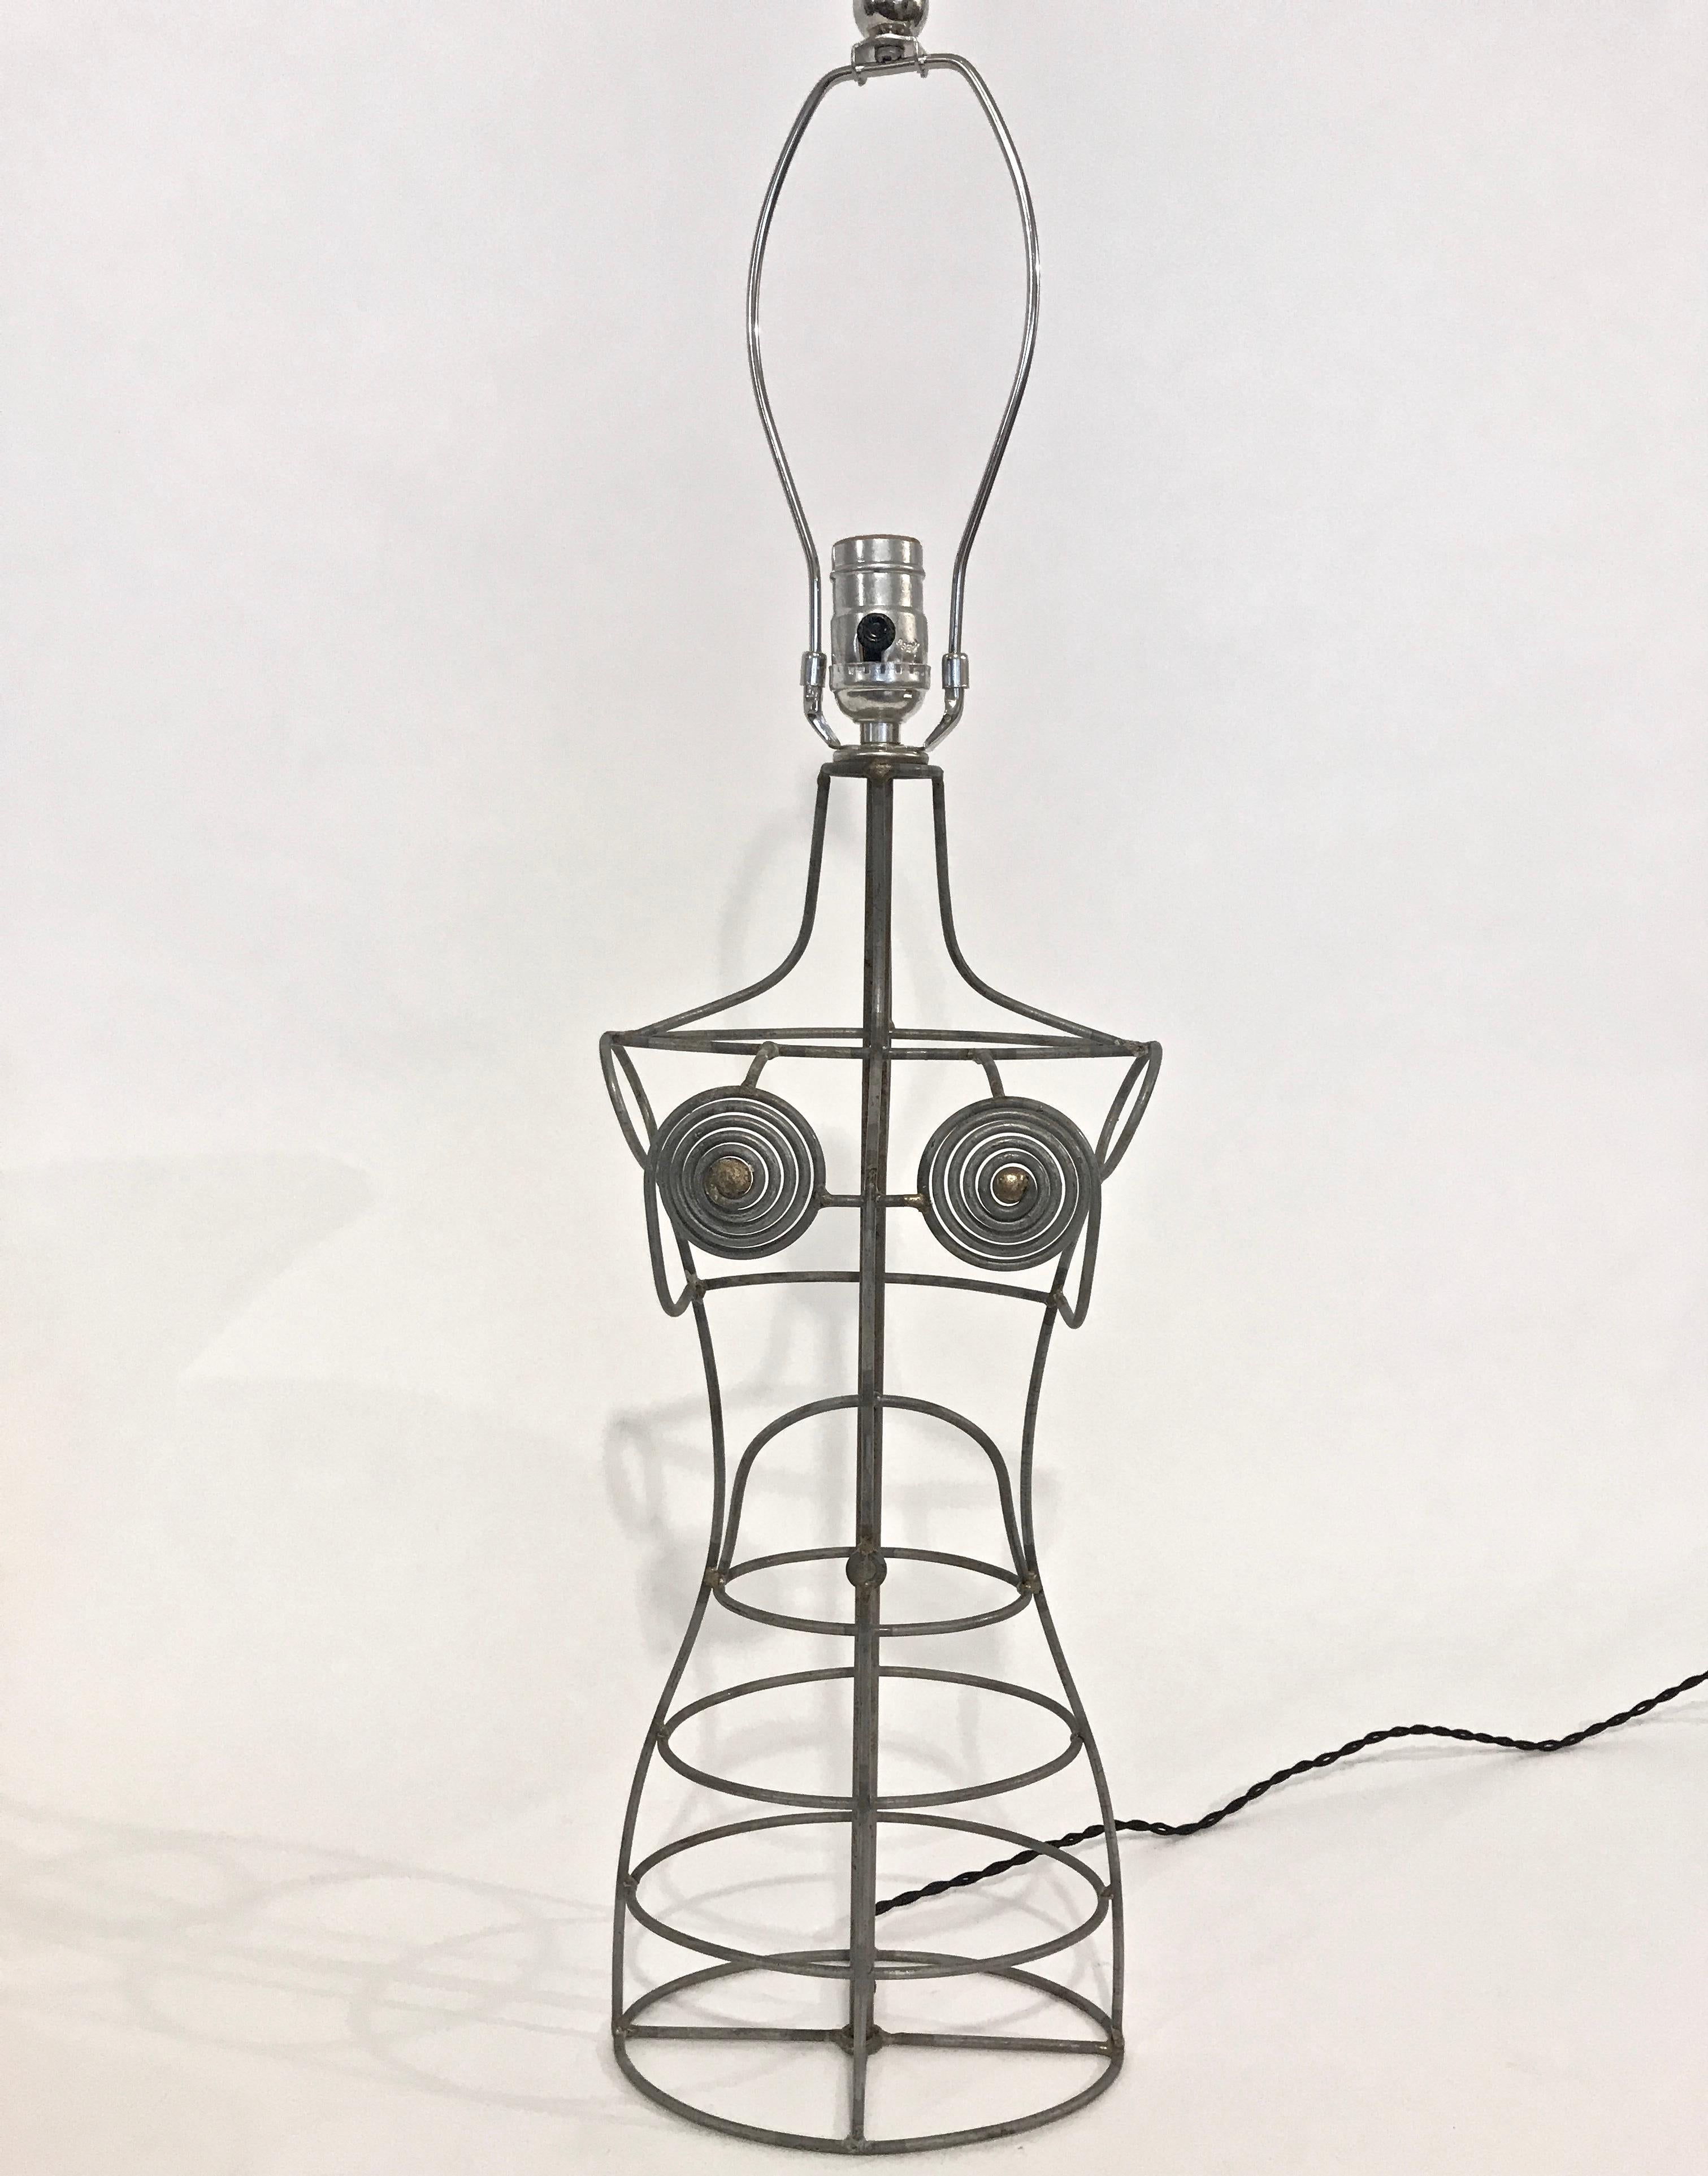 French Welded Steel Wire Dress Form Table Lamp, C. 1970 For Sale 2